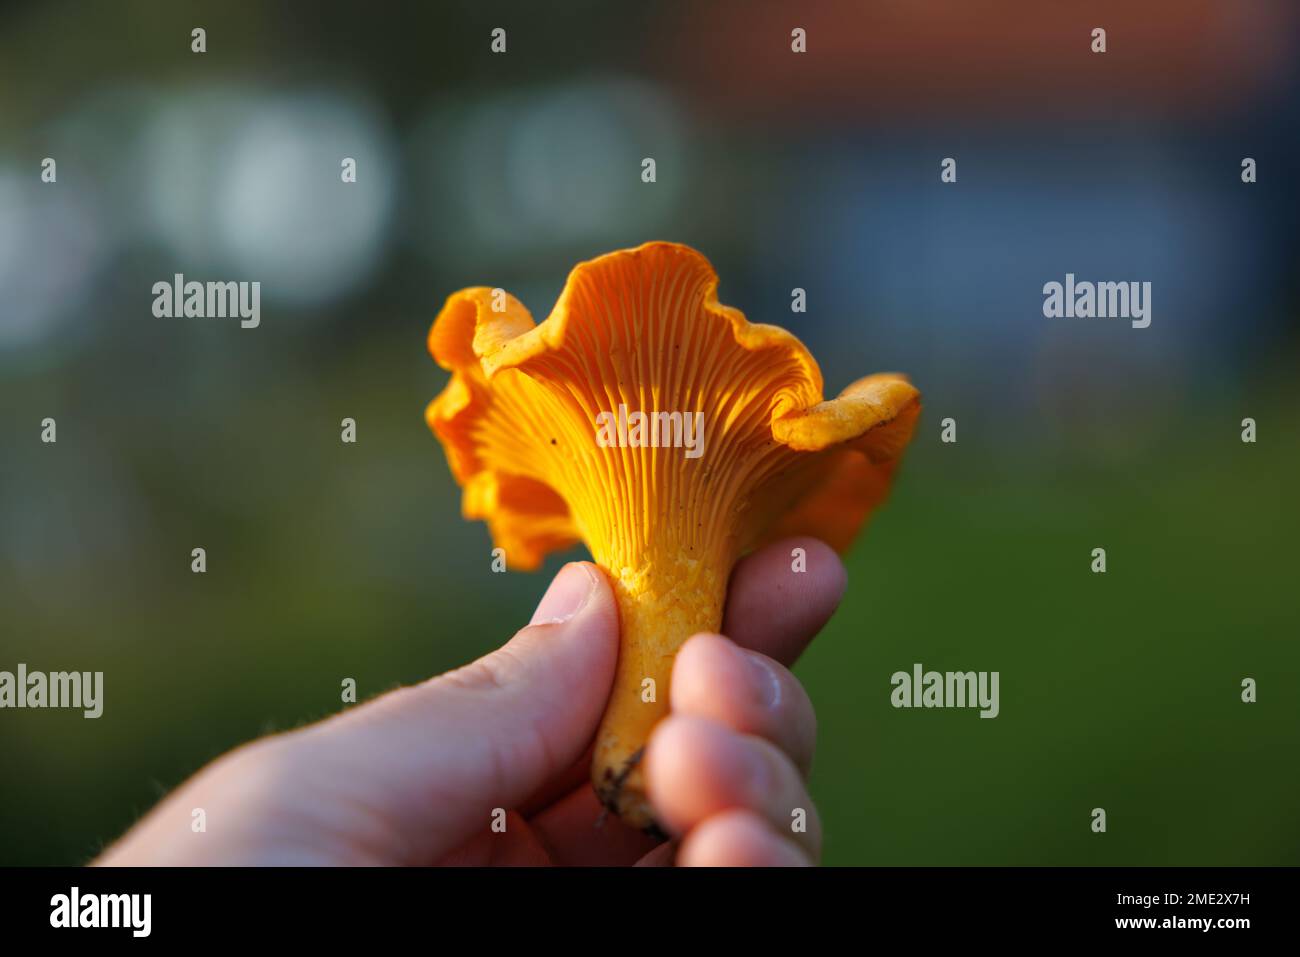 A closeup of a person's hand holding an edible Yellow chanterelle mushroom (kantarell) on the blurred background Stock Photo